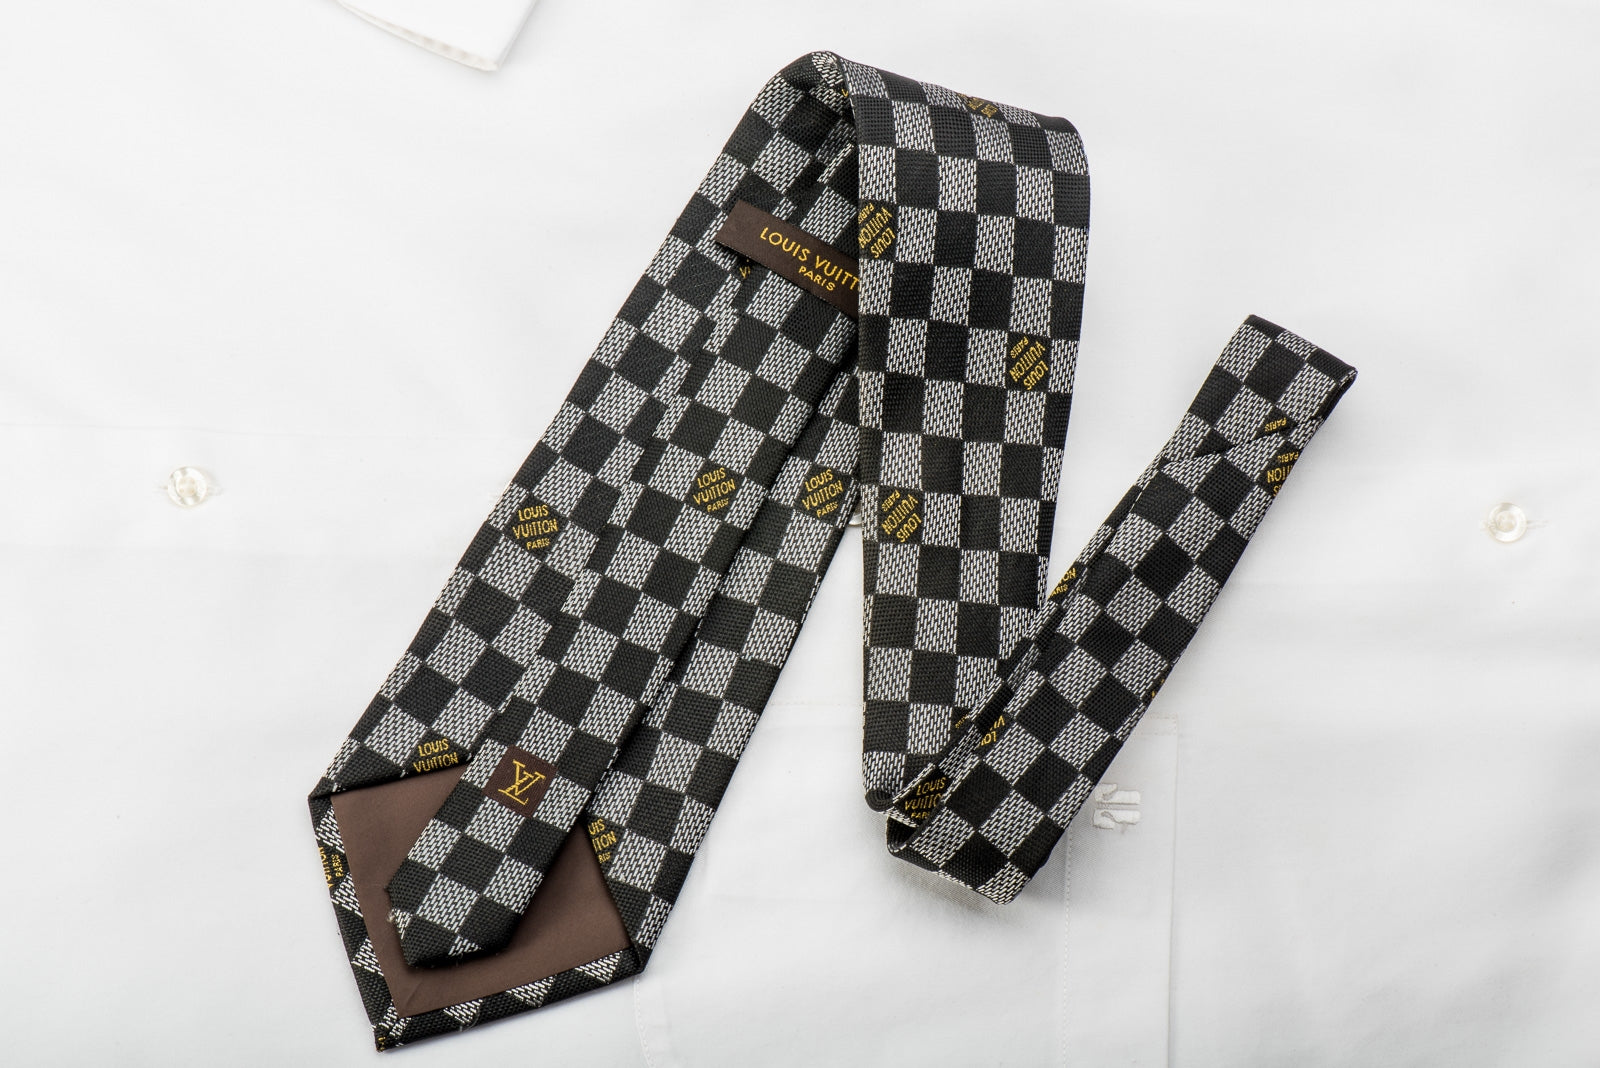 Louis Vuitton Black and Gold Jacquard Damier Silk Tie For Sale at